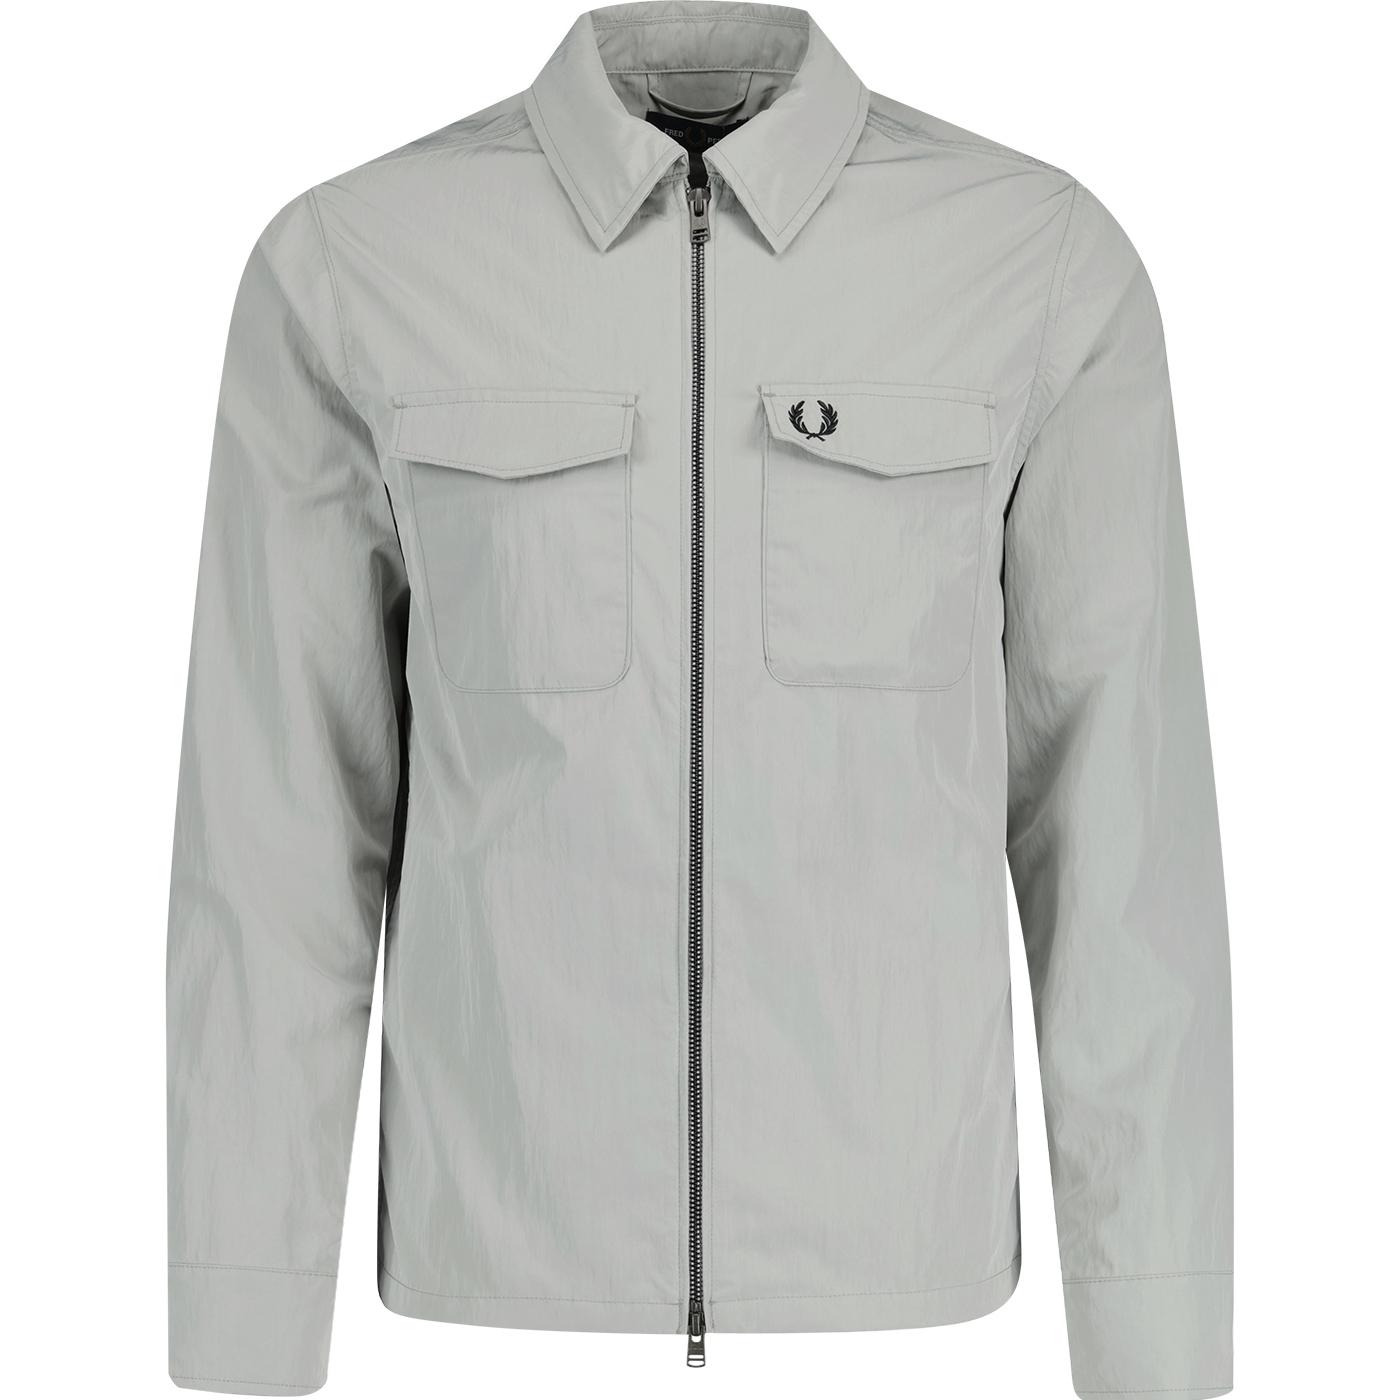 Fred Perry Retro Textured Zip Through Overshirt L